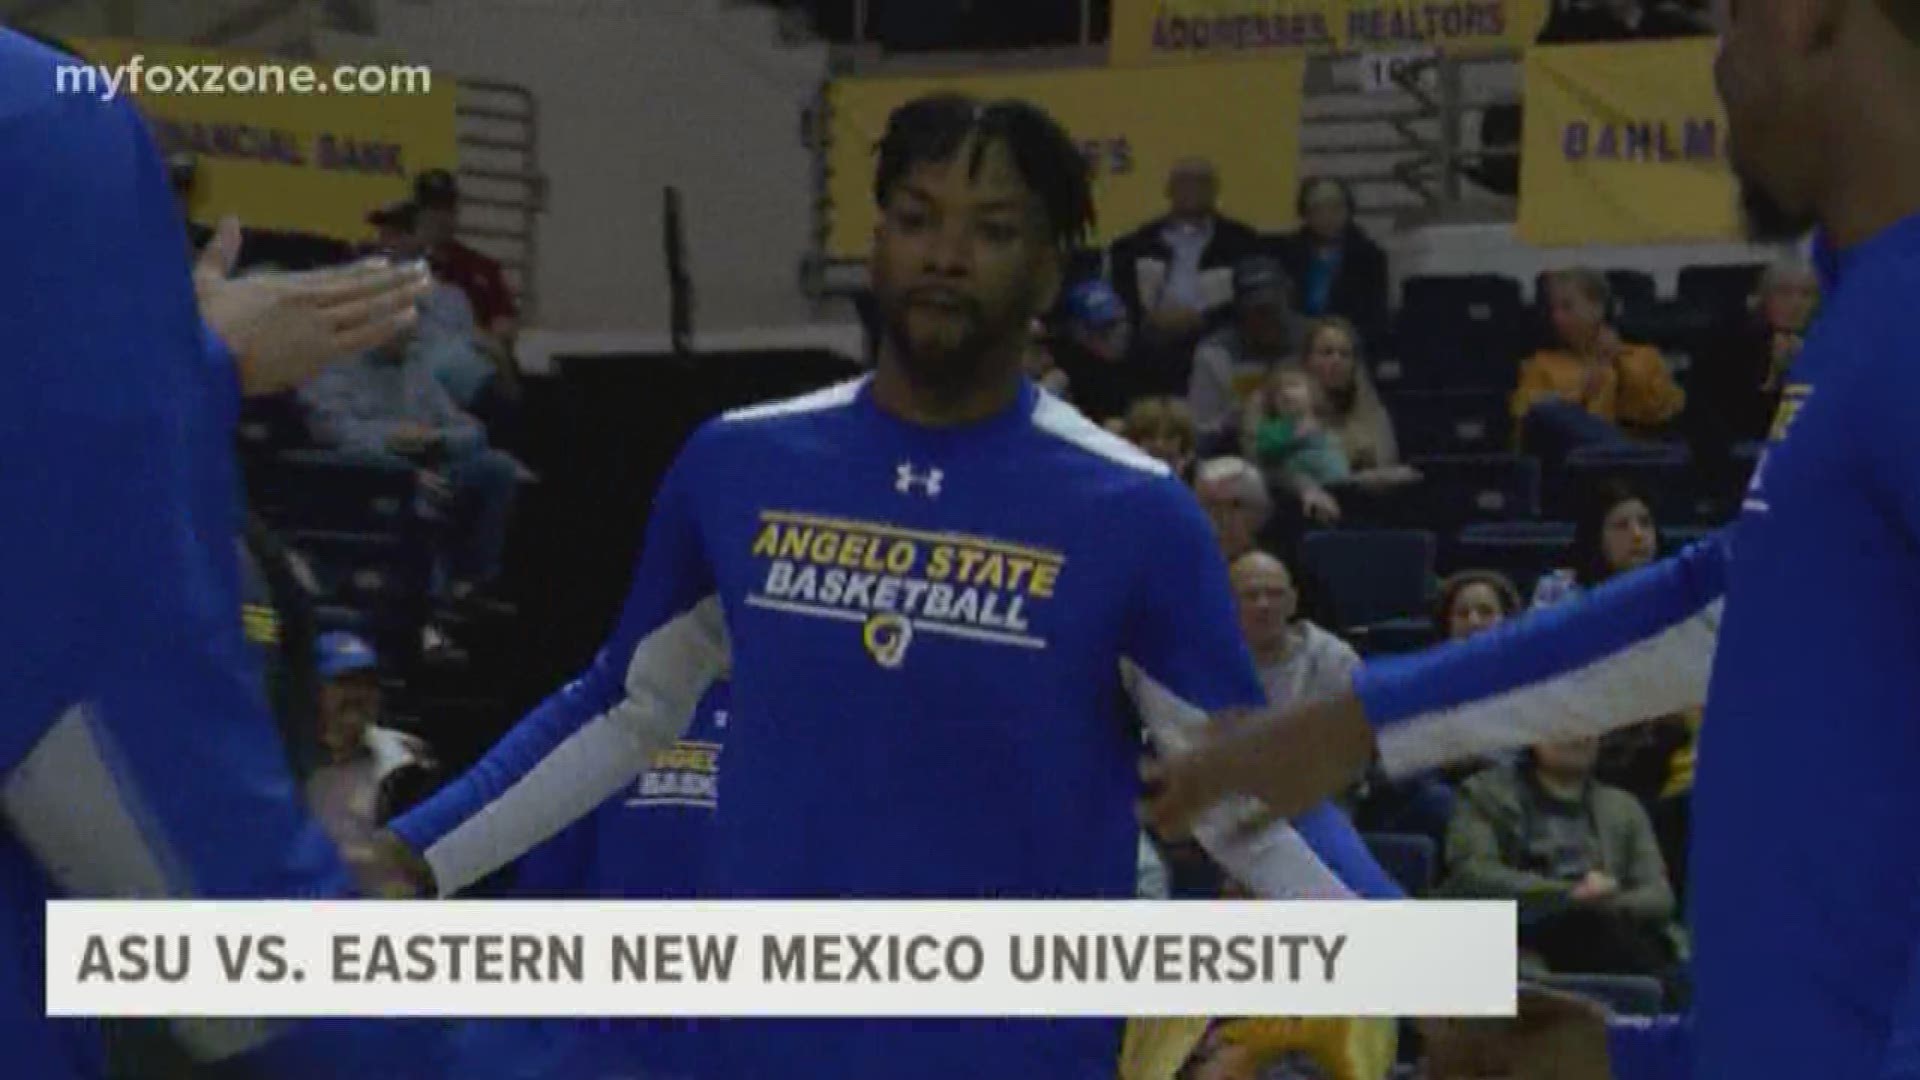 Both the Angelo State men and women picked up big wins over Eastern New Mexico University. Check out our highlights.